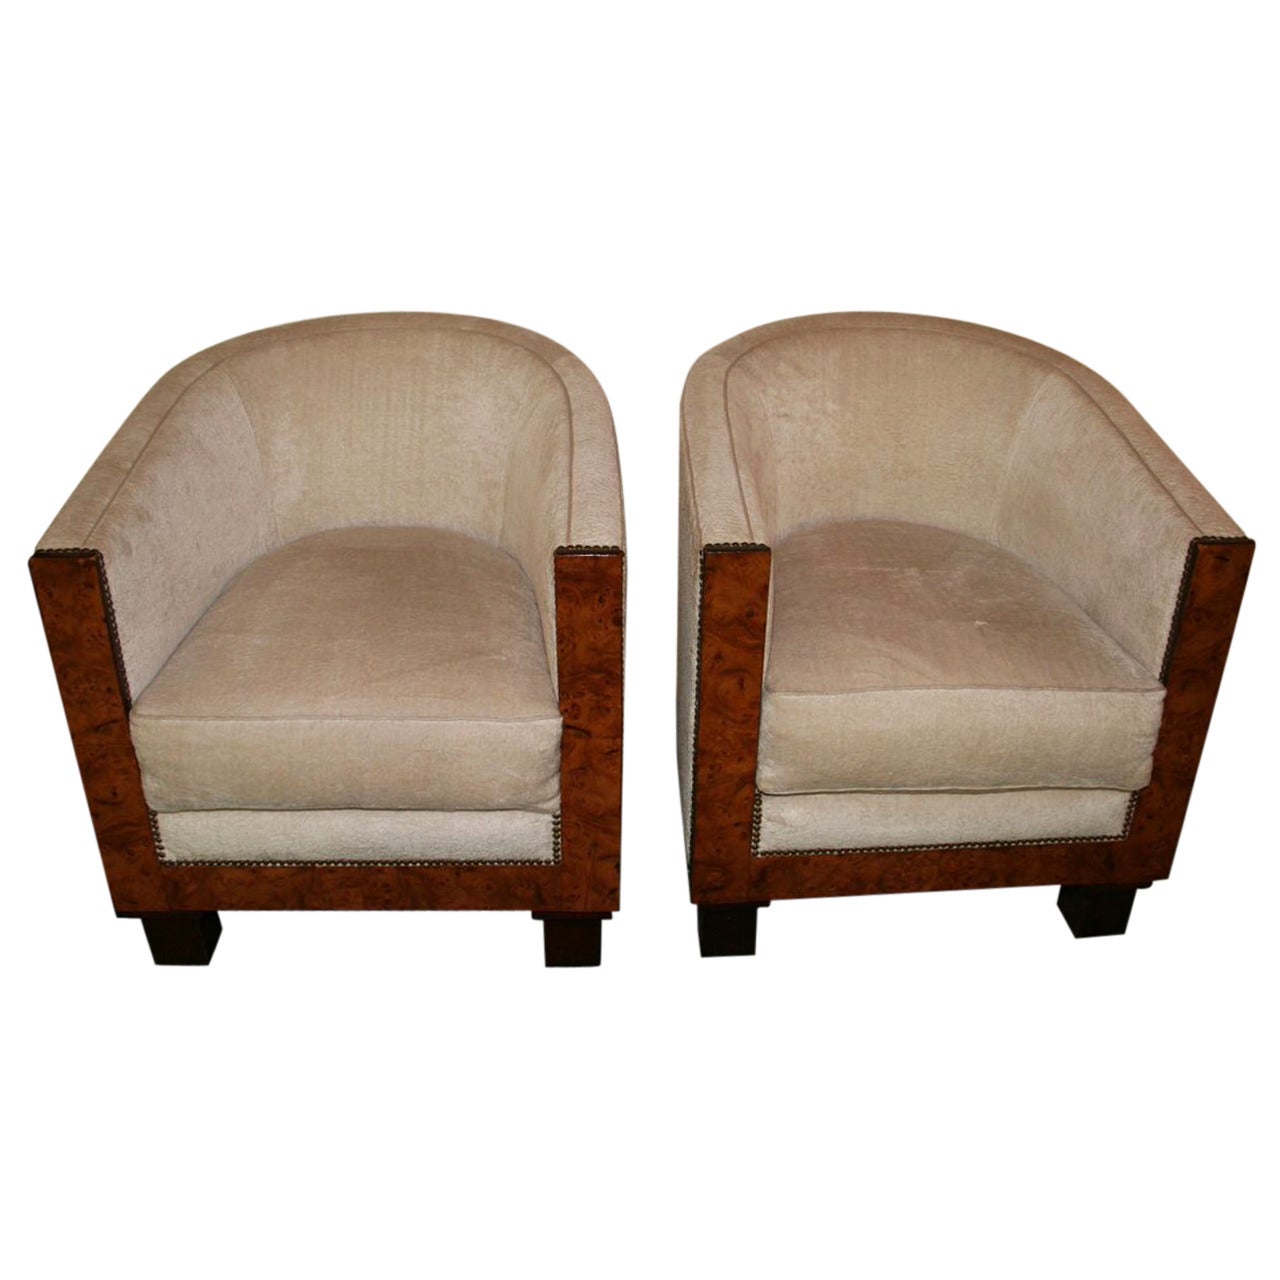 Pair of French 1930s Art Deco Barrel Chairs For Sale